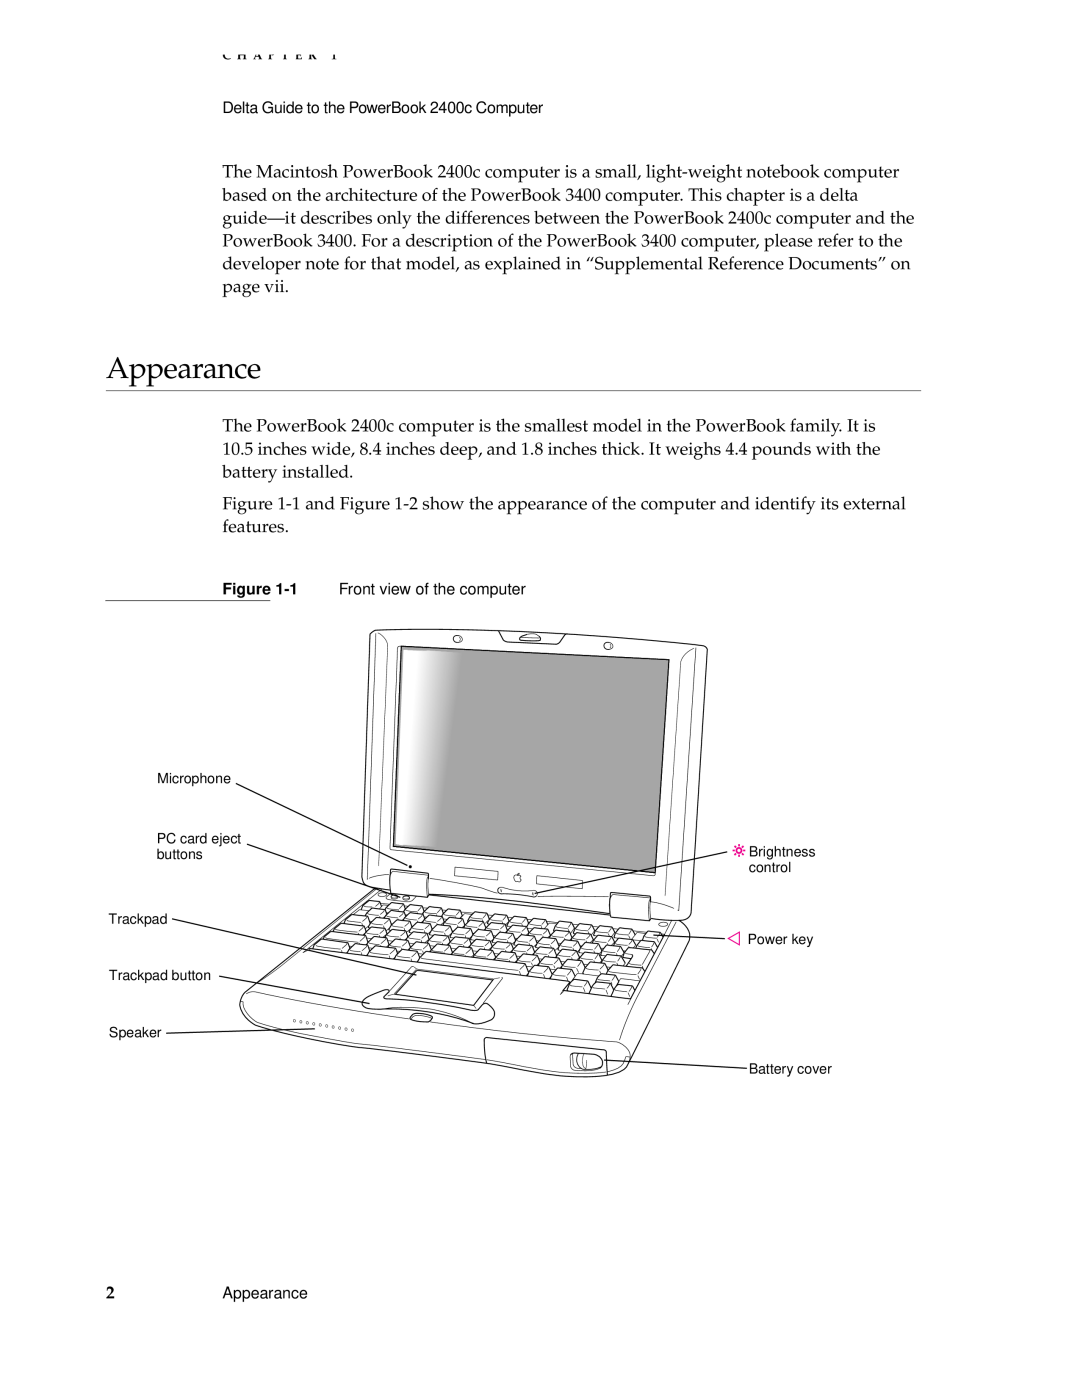 Apple 2400C manual Delta Guide to the PowerBook 2400c Computer, 1 Front view of the computer, 2Appearance 